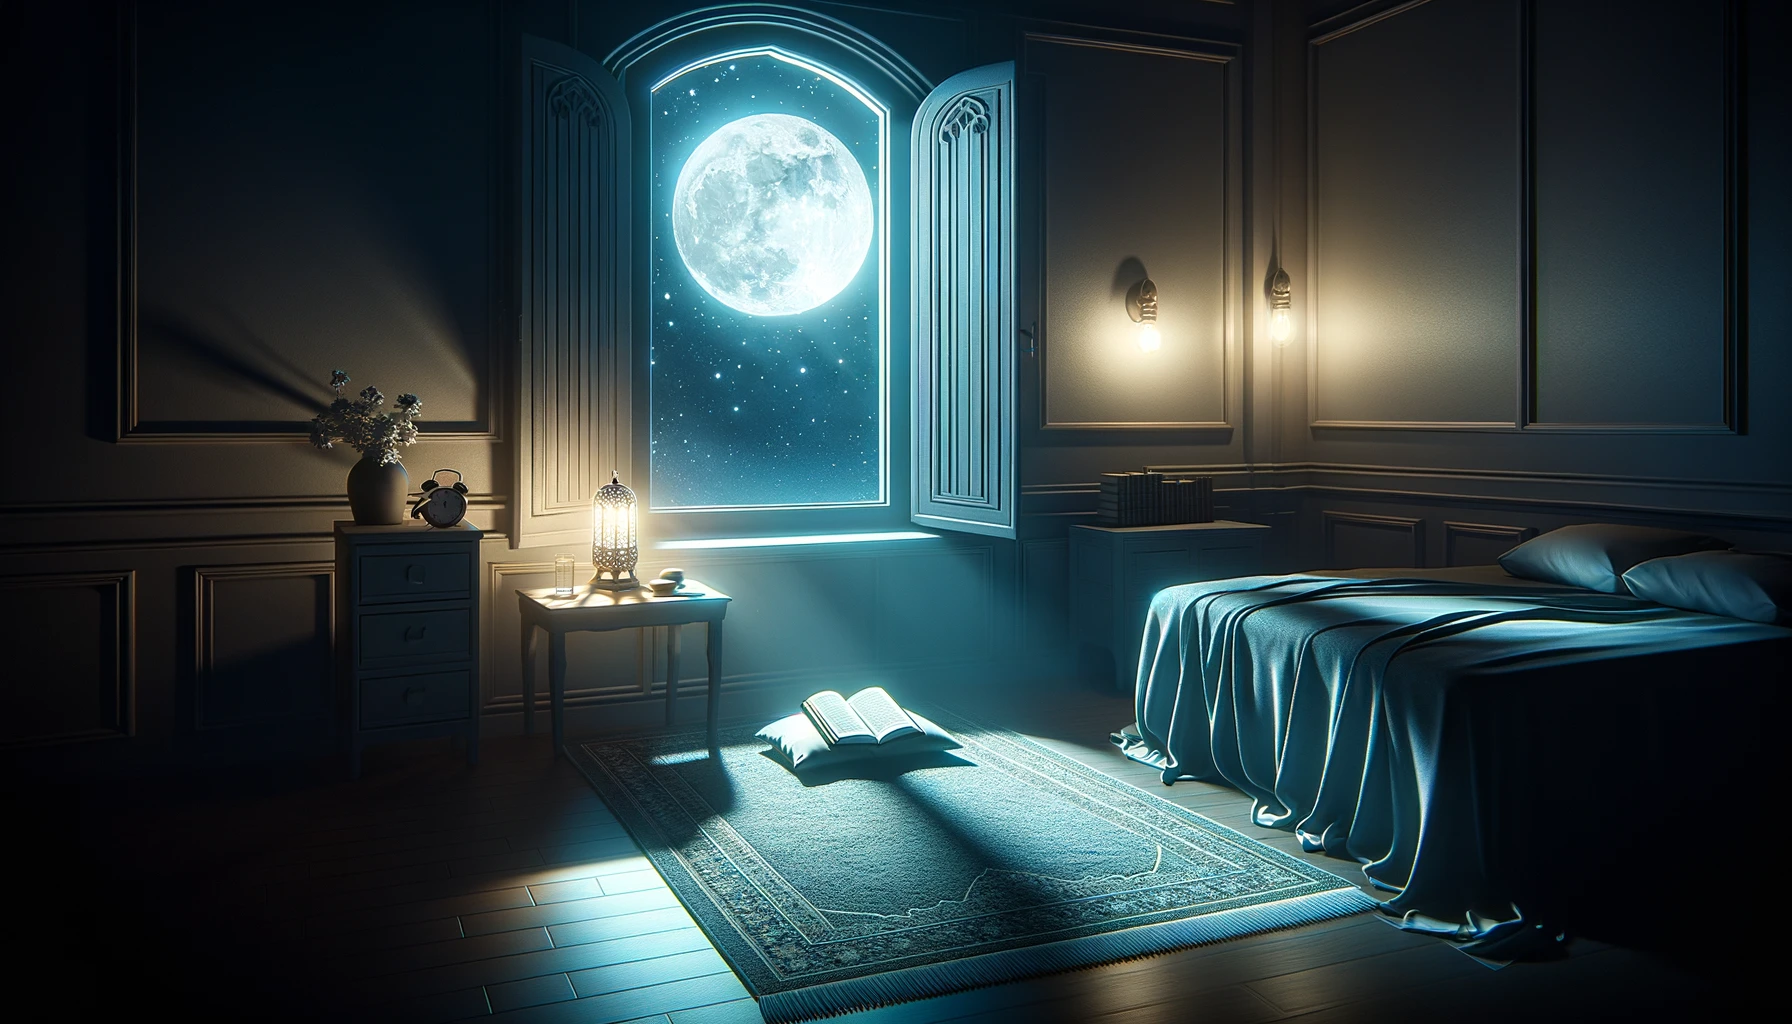 A serene bedroom at night with moonlight streaming through an open window, illuminating a prayer mat and an open Quran on the bedside table, symbolizing the practice of nighttime prayers in Islam.